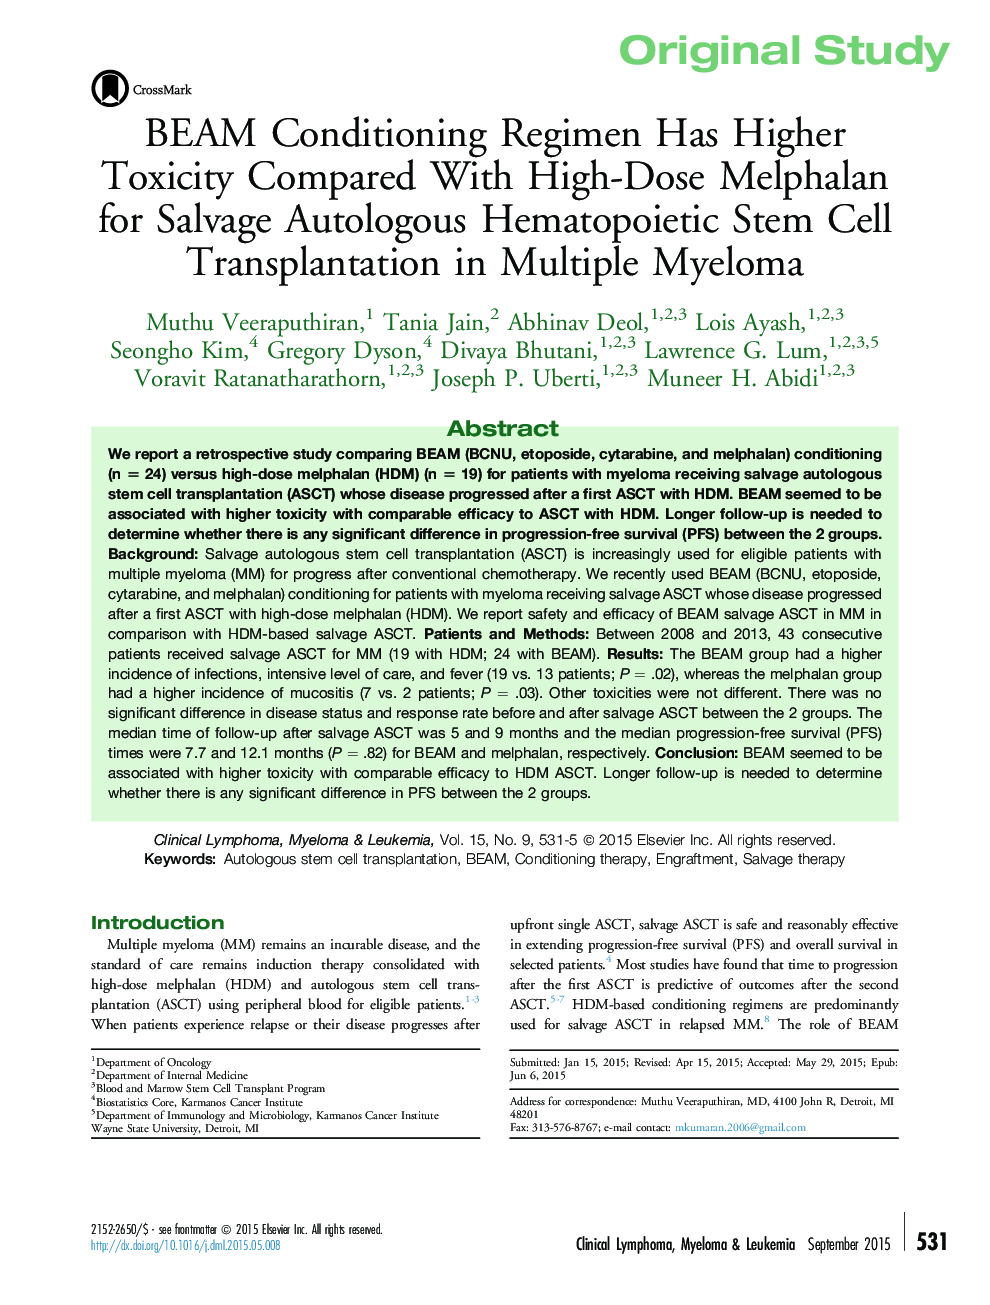 BEAM Conditioning Regimen Has Higher Toxicity Compared With High-Dose Melphalan for Salvage Autologous Hematopoietic Stem Cell Transplantation in Multiple Myeloma